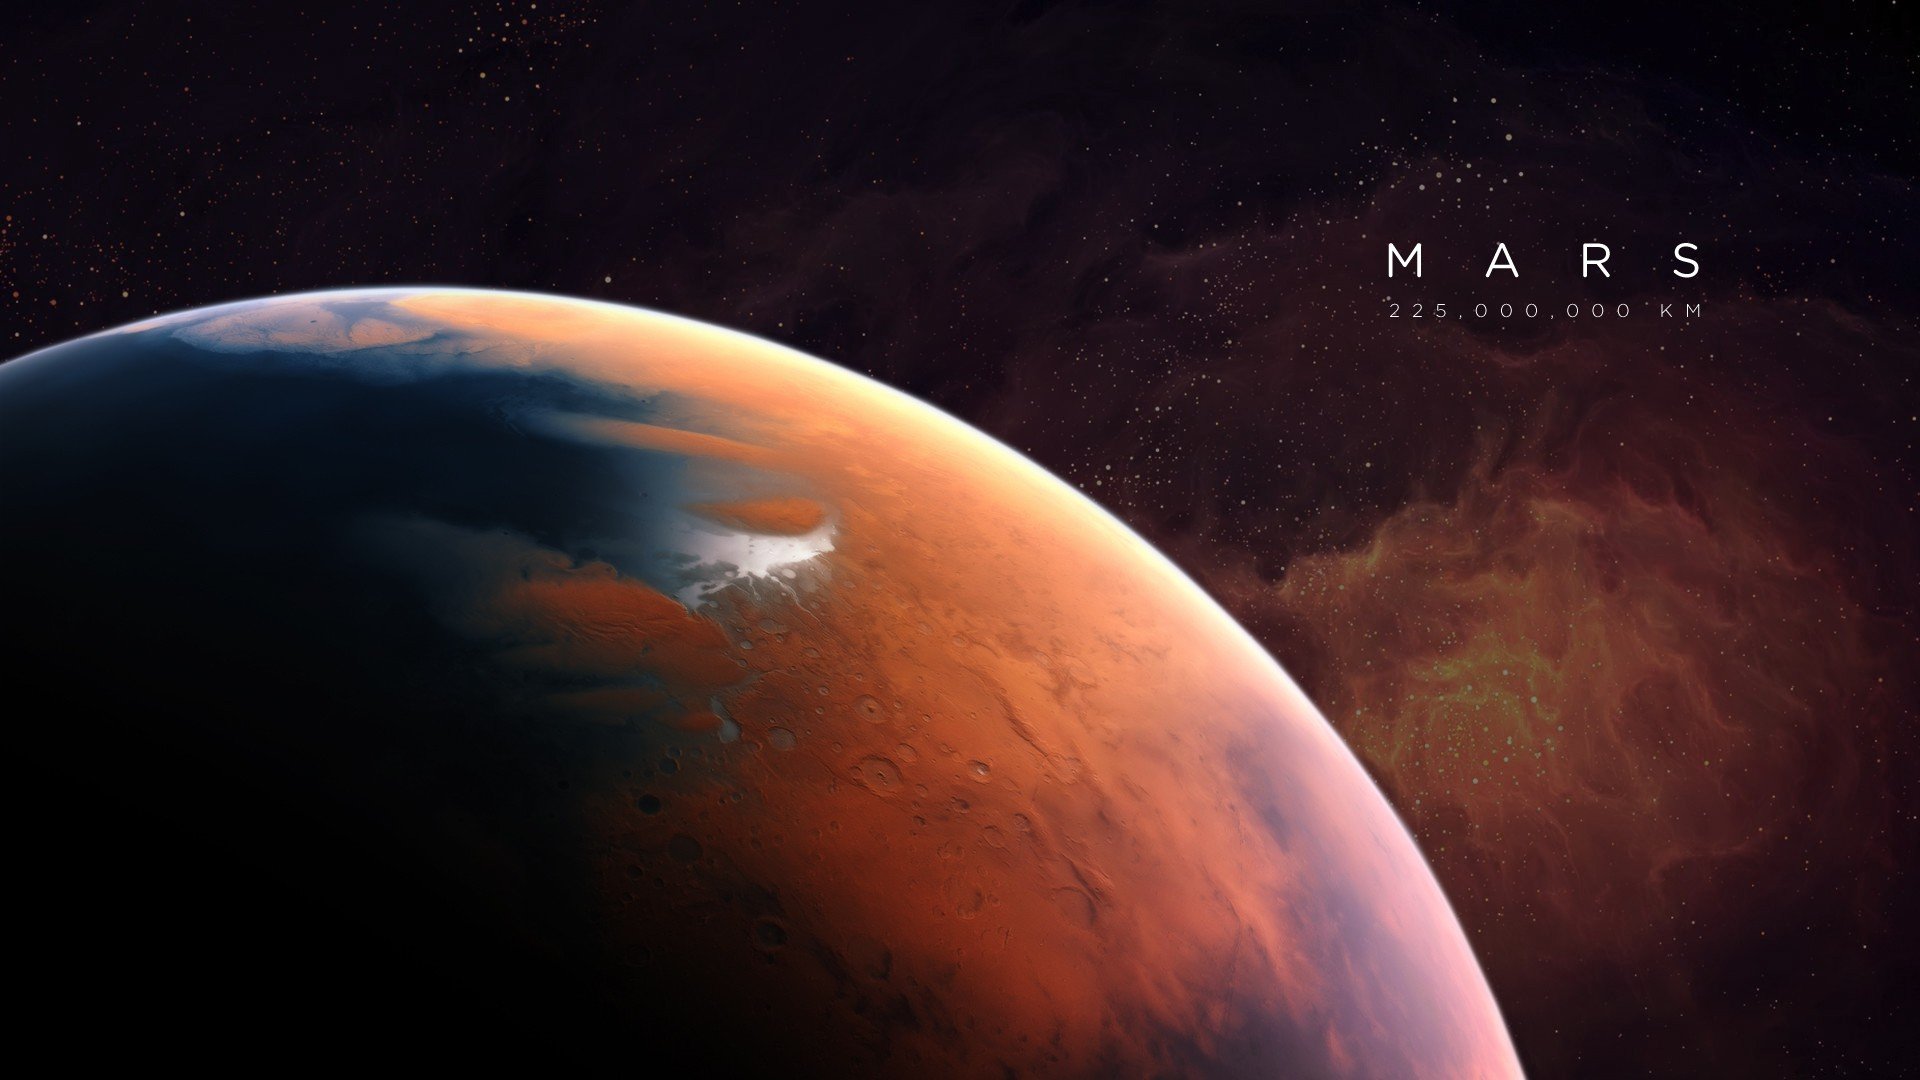 30 The Martian HD Wallpapers and Backgrounds